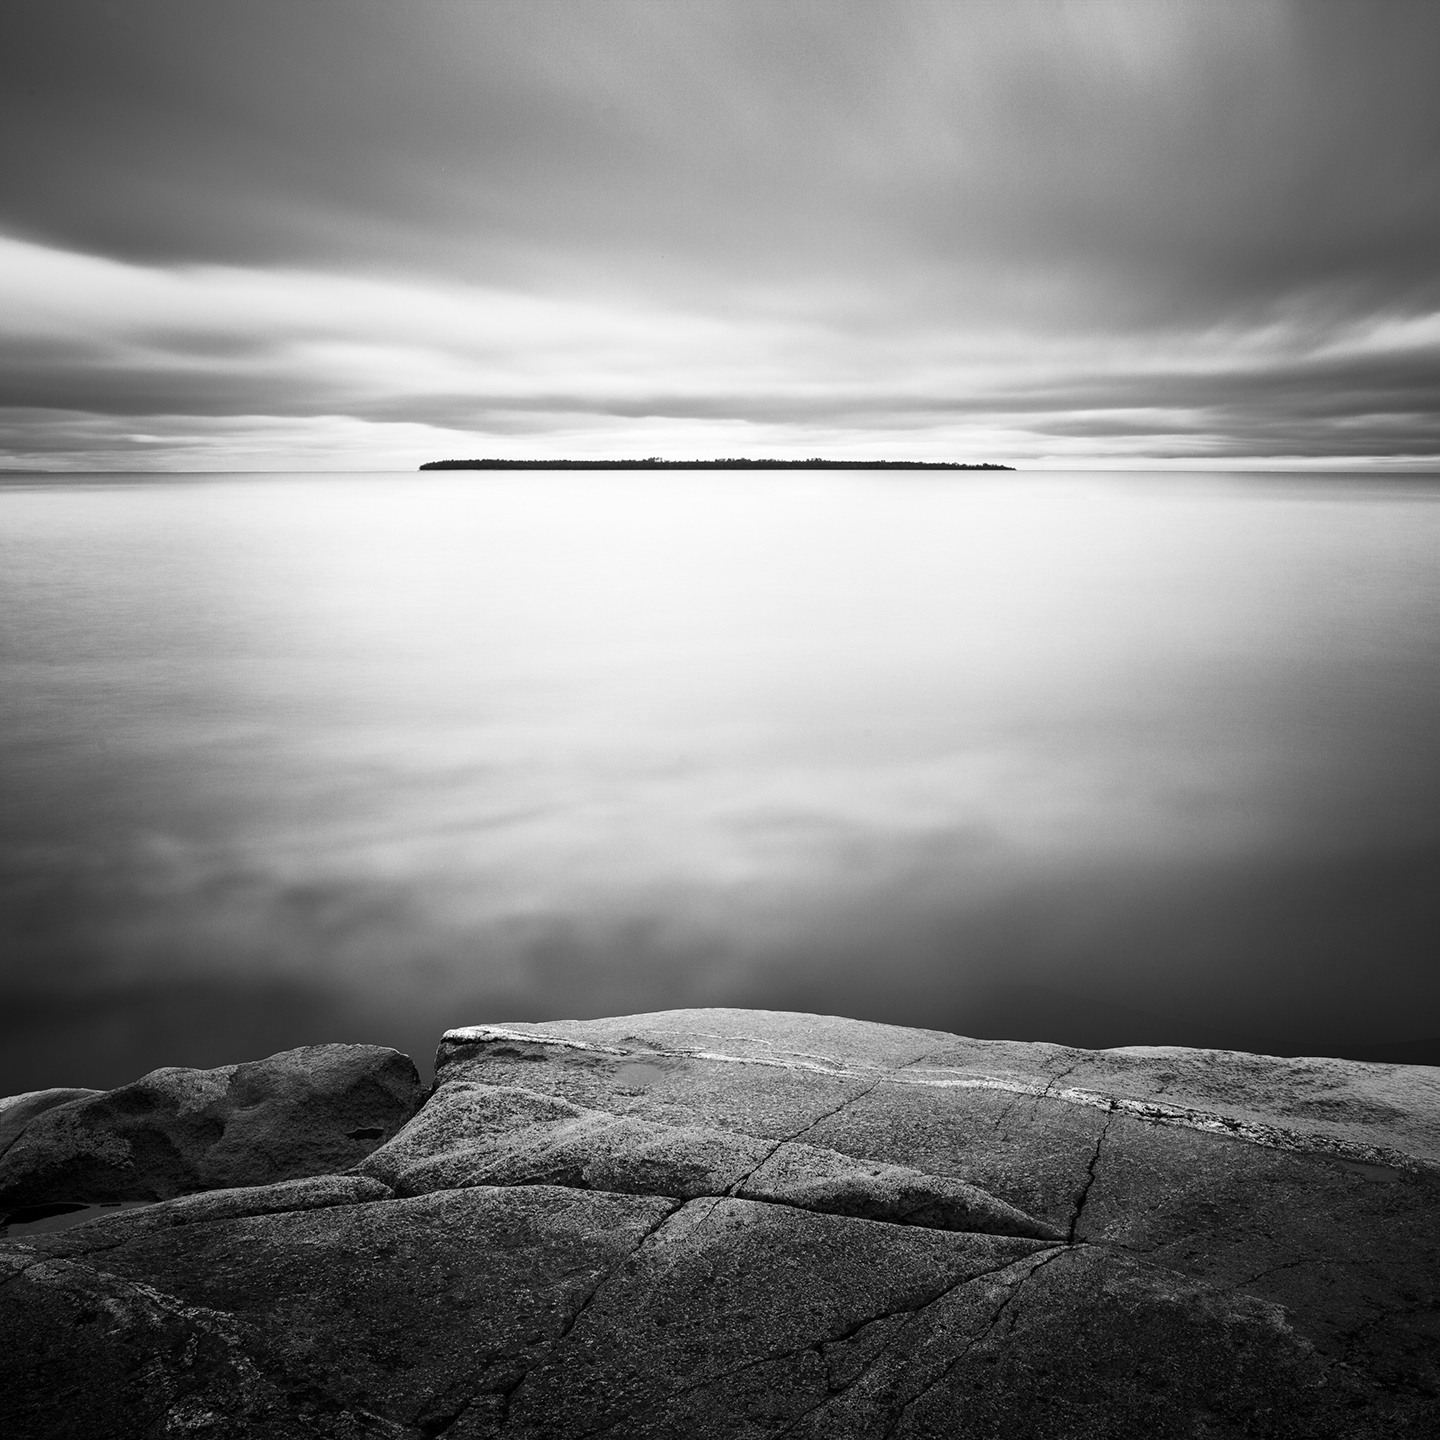 Black and white image of a faraway island, taken from a rocky outcrop